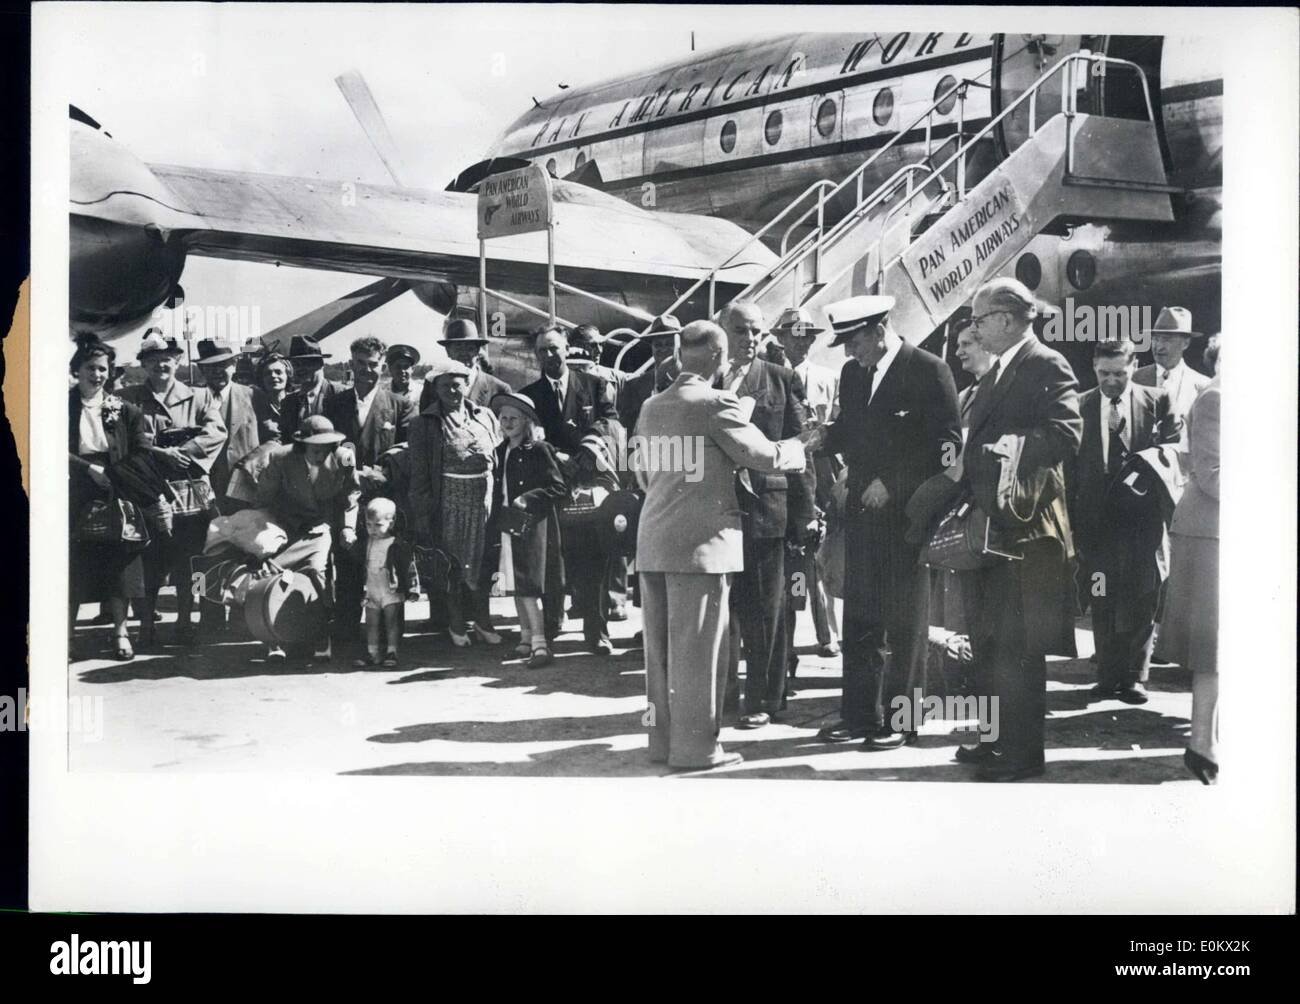 Aug. 21, 1950 - 114 German-Americans from Buffalo, NY, members of the Weidner-Club, flew from Buffalo to Frankfurt to visit their homeland once more. The group took two Pan-American Clippers and were greeted by Mayor Dr. Kolb. The captain was given the golden key to the city. Stock Photo